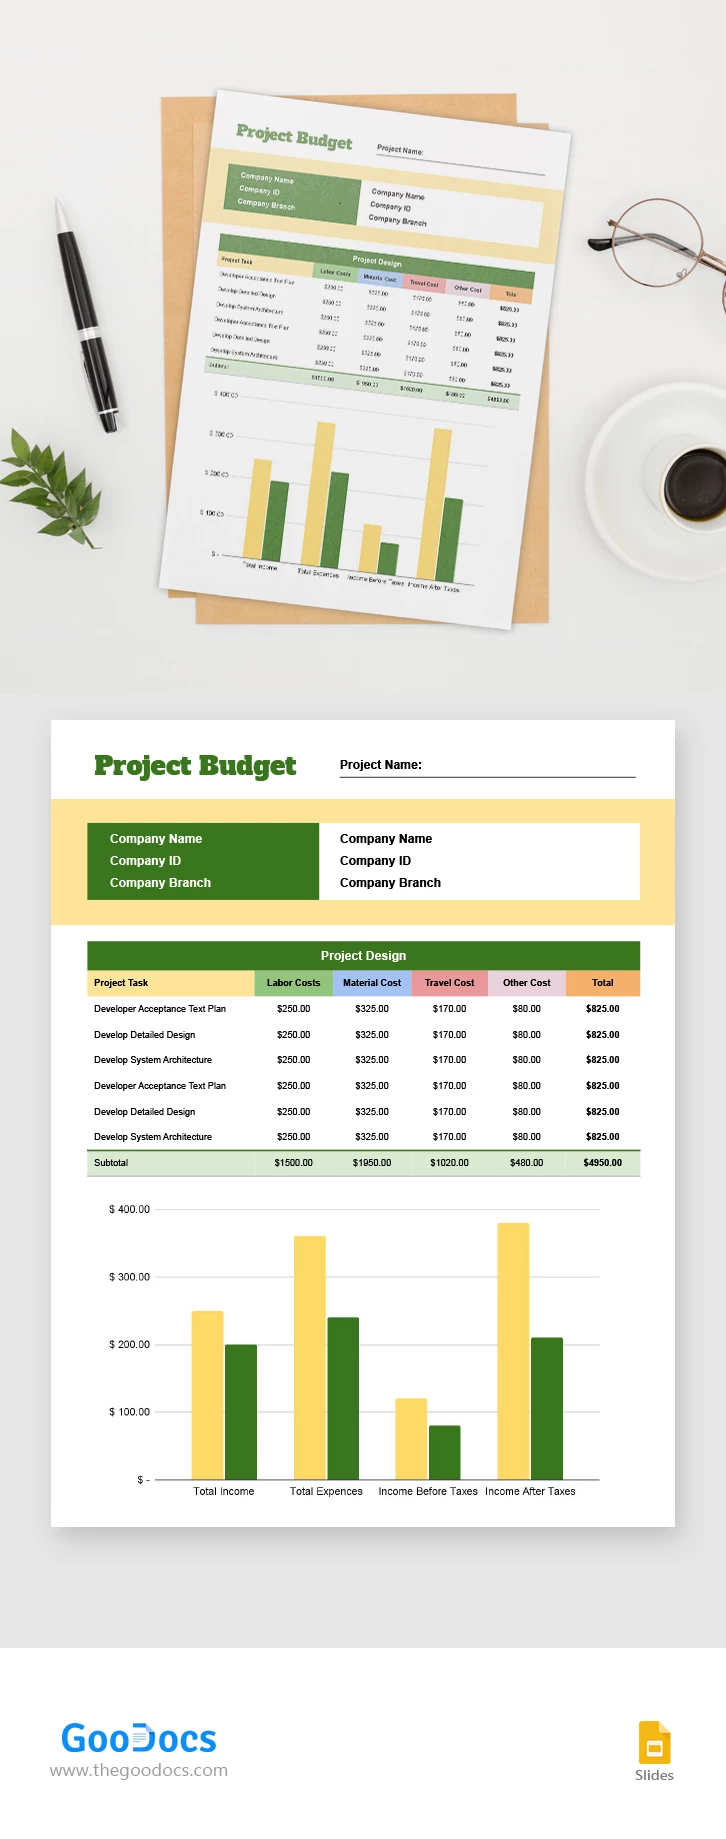 Project Budget - free Google Docs Template - 10067286